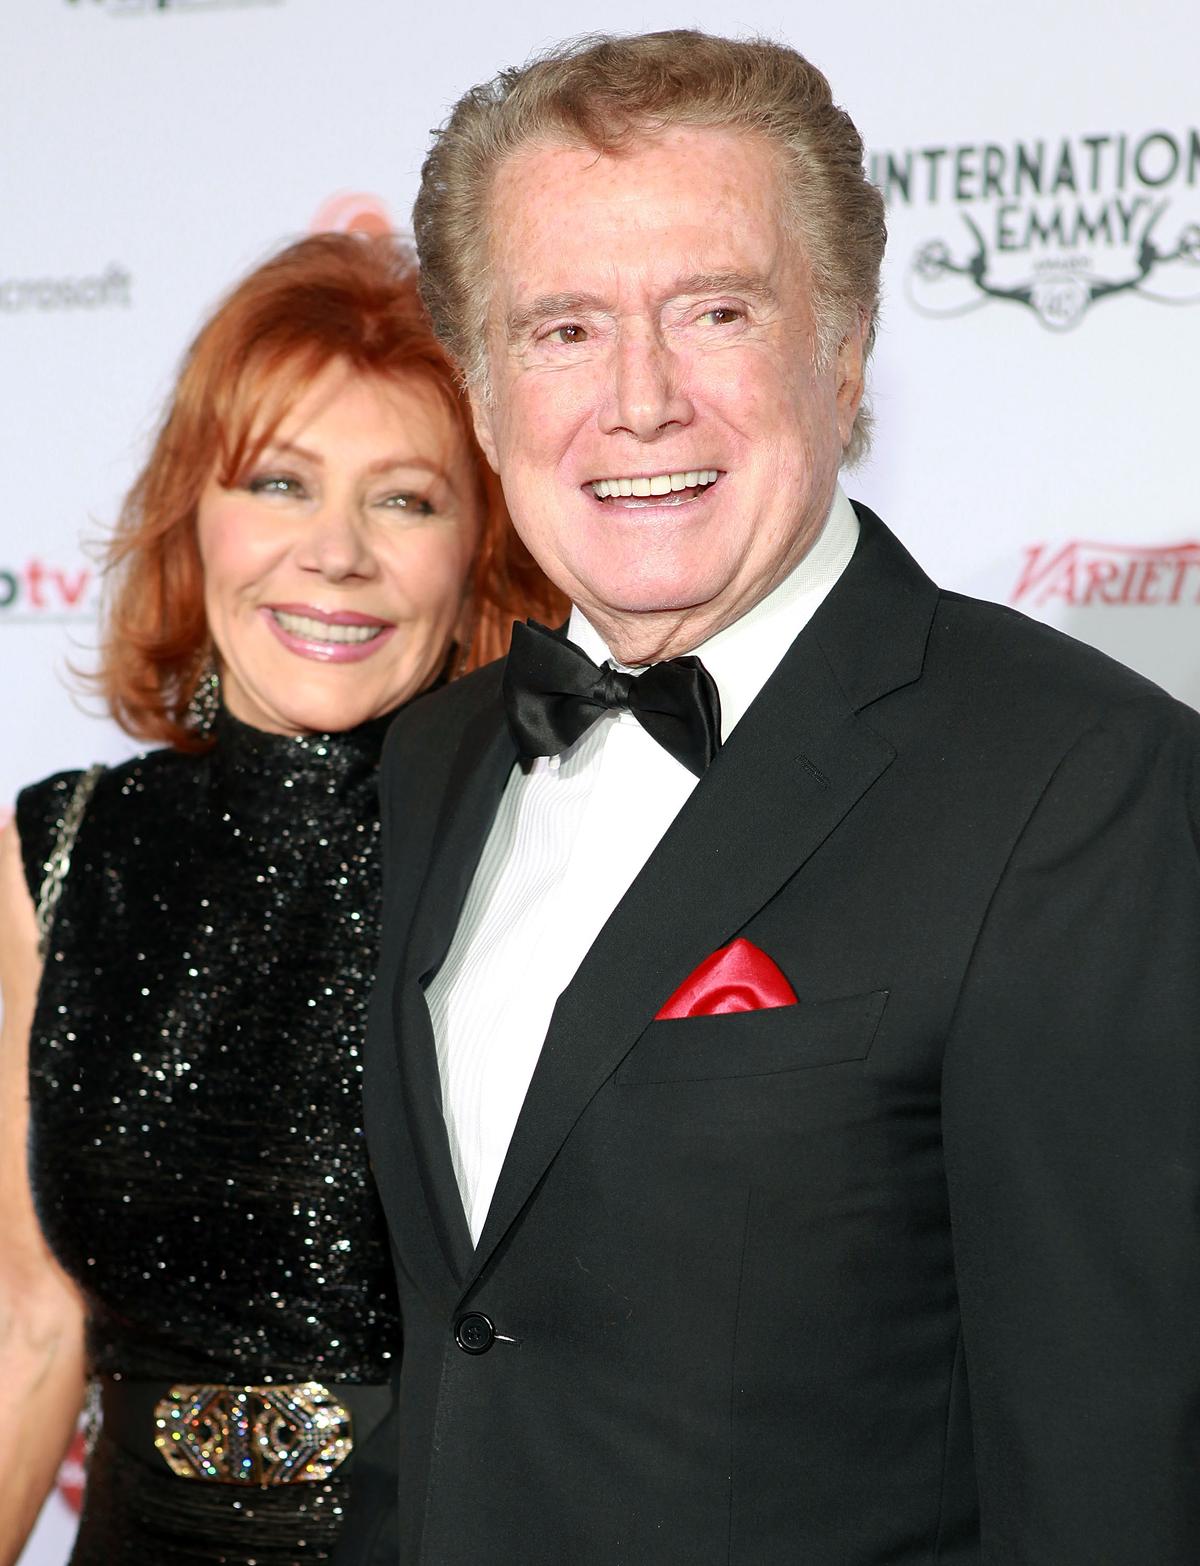 Joy Philbin (L) and Regis Philbin attend the 40th International Emmy Awards on November 19, 2012 in New York City. (©Getty Images | <a href="https://www.gettyimages.com/detail/news-photo/joy-philbin-and-regis-philbin-attend-the-40th-international-news-photo/156737639">Robin Marchant</a>)